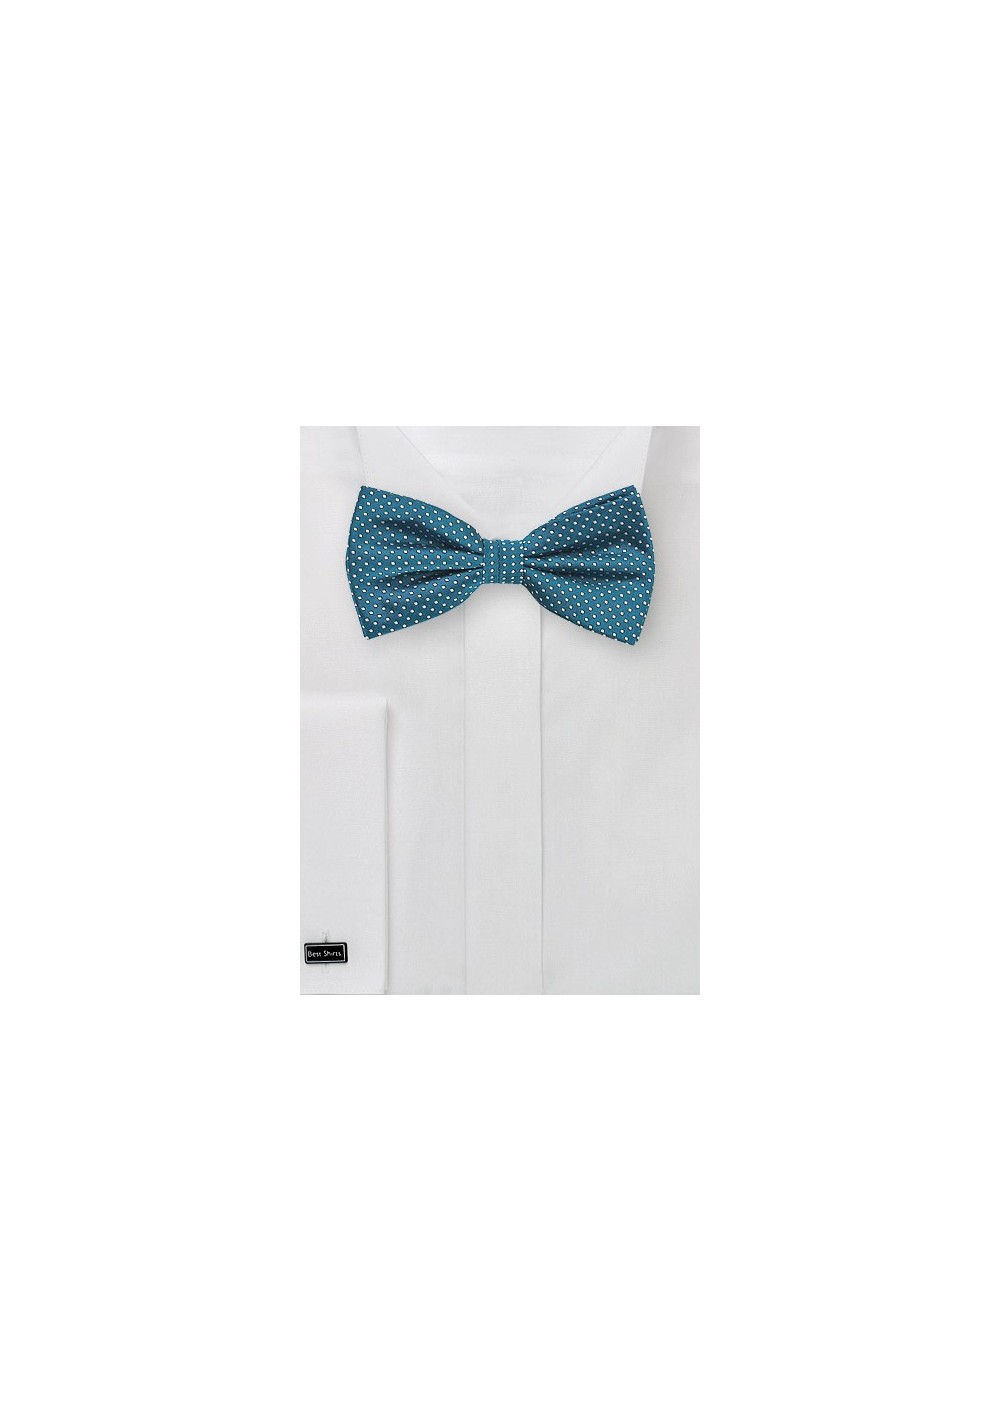 Teal Pin Dot Bow Tie